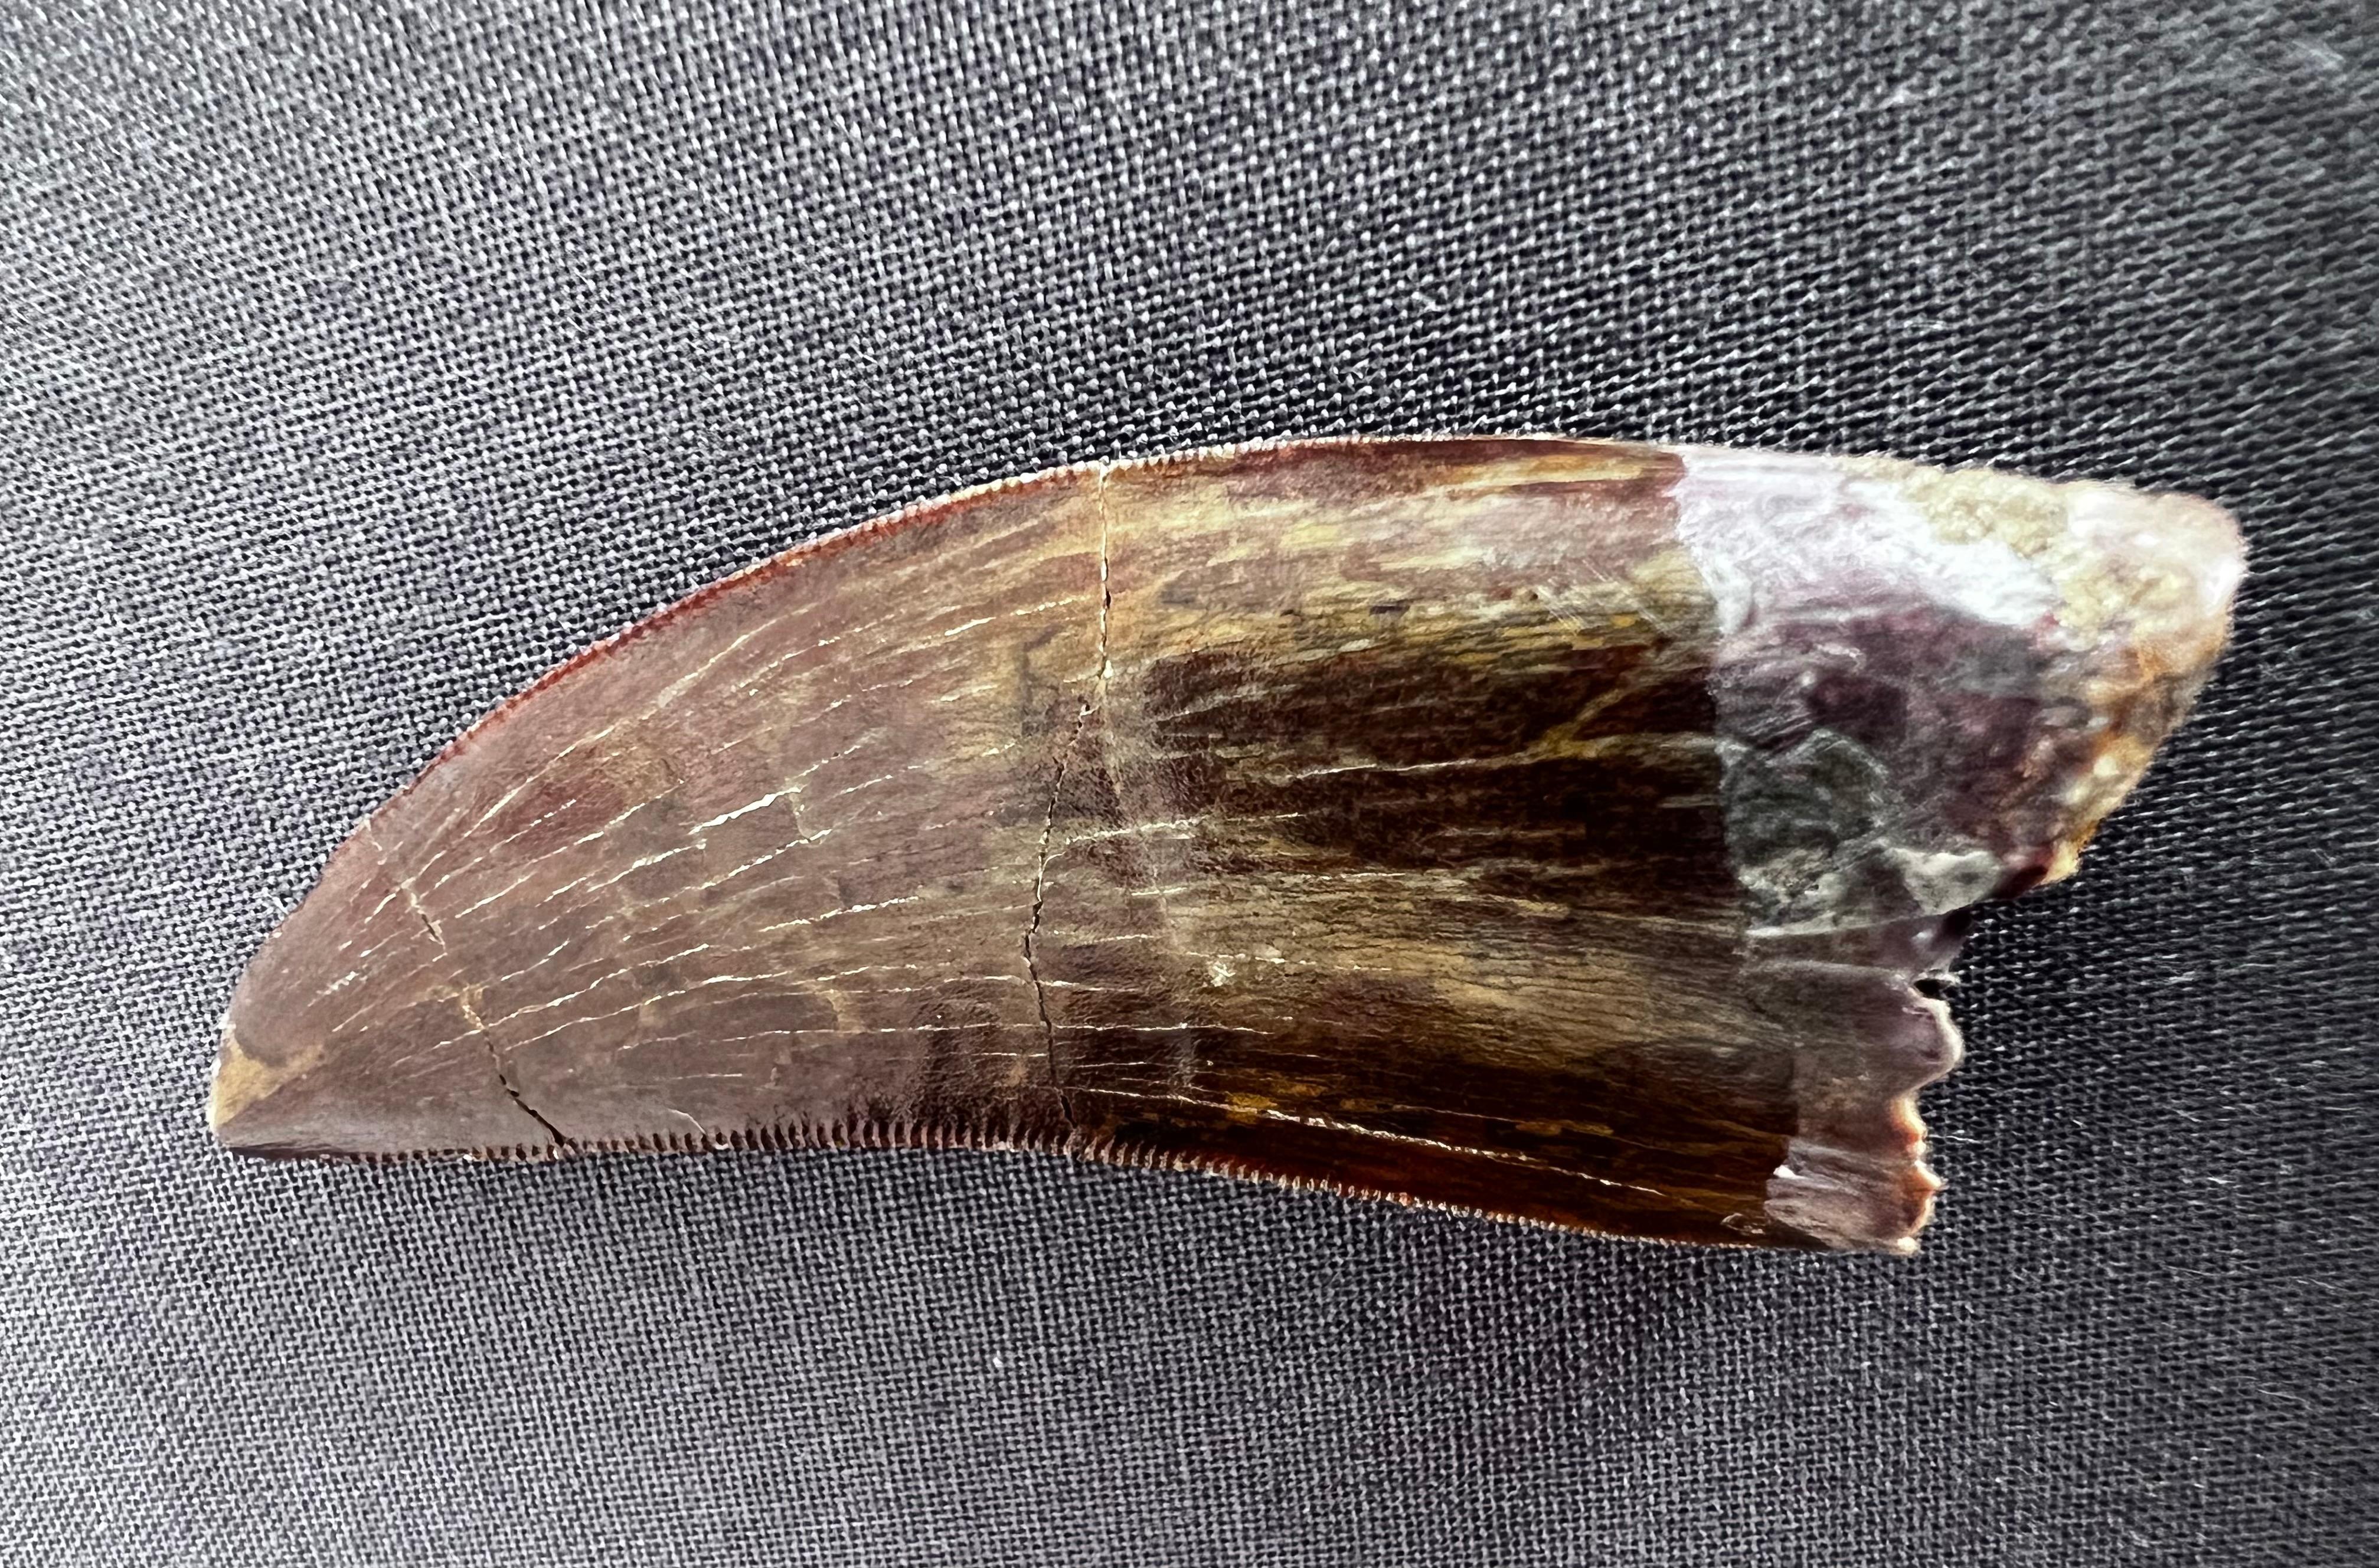 Carnivorous dinosaur tooth (from a very large African T-rex) with chocolate coloured fossilisation. Very nice fossilization, crenellations of the edge visible and in very good condition. Sold free of base, with certificate of authenticity from Mr.